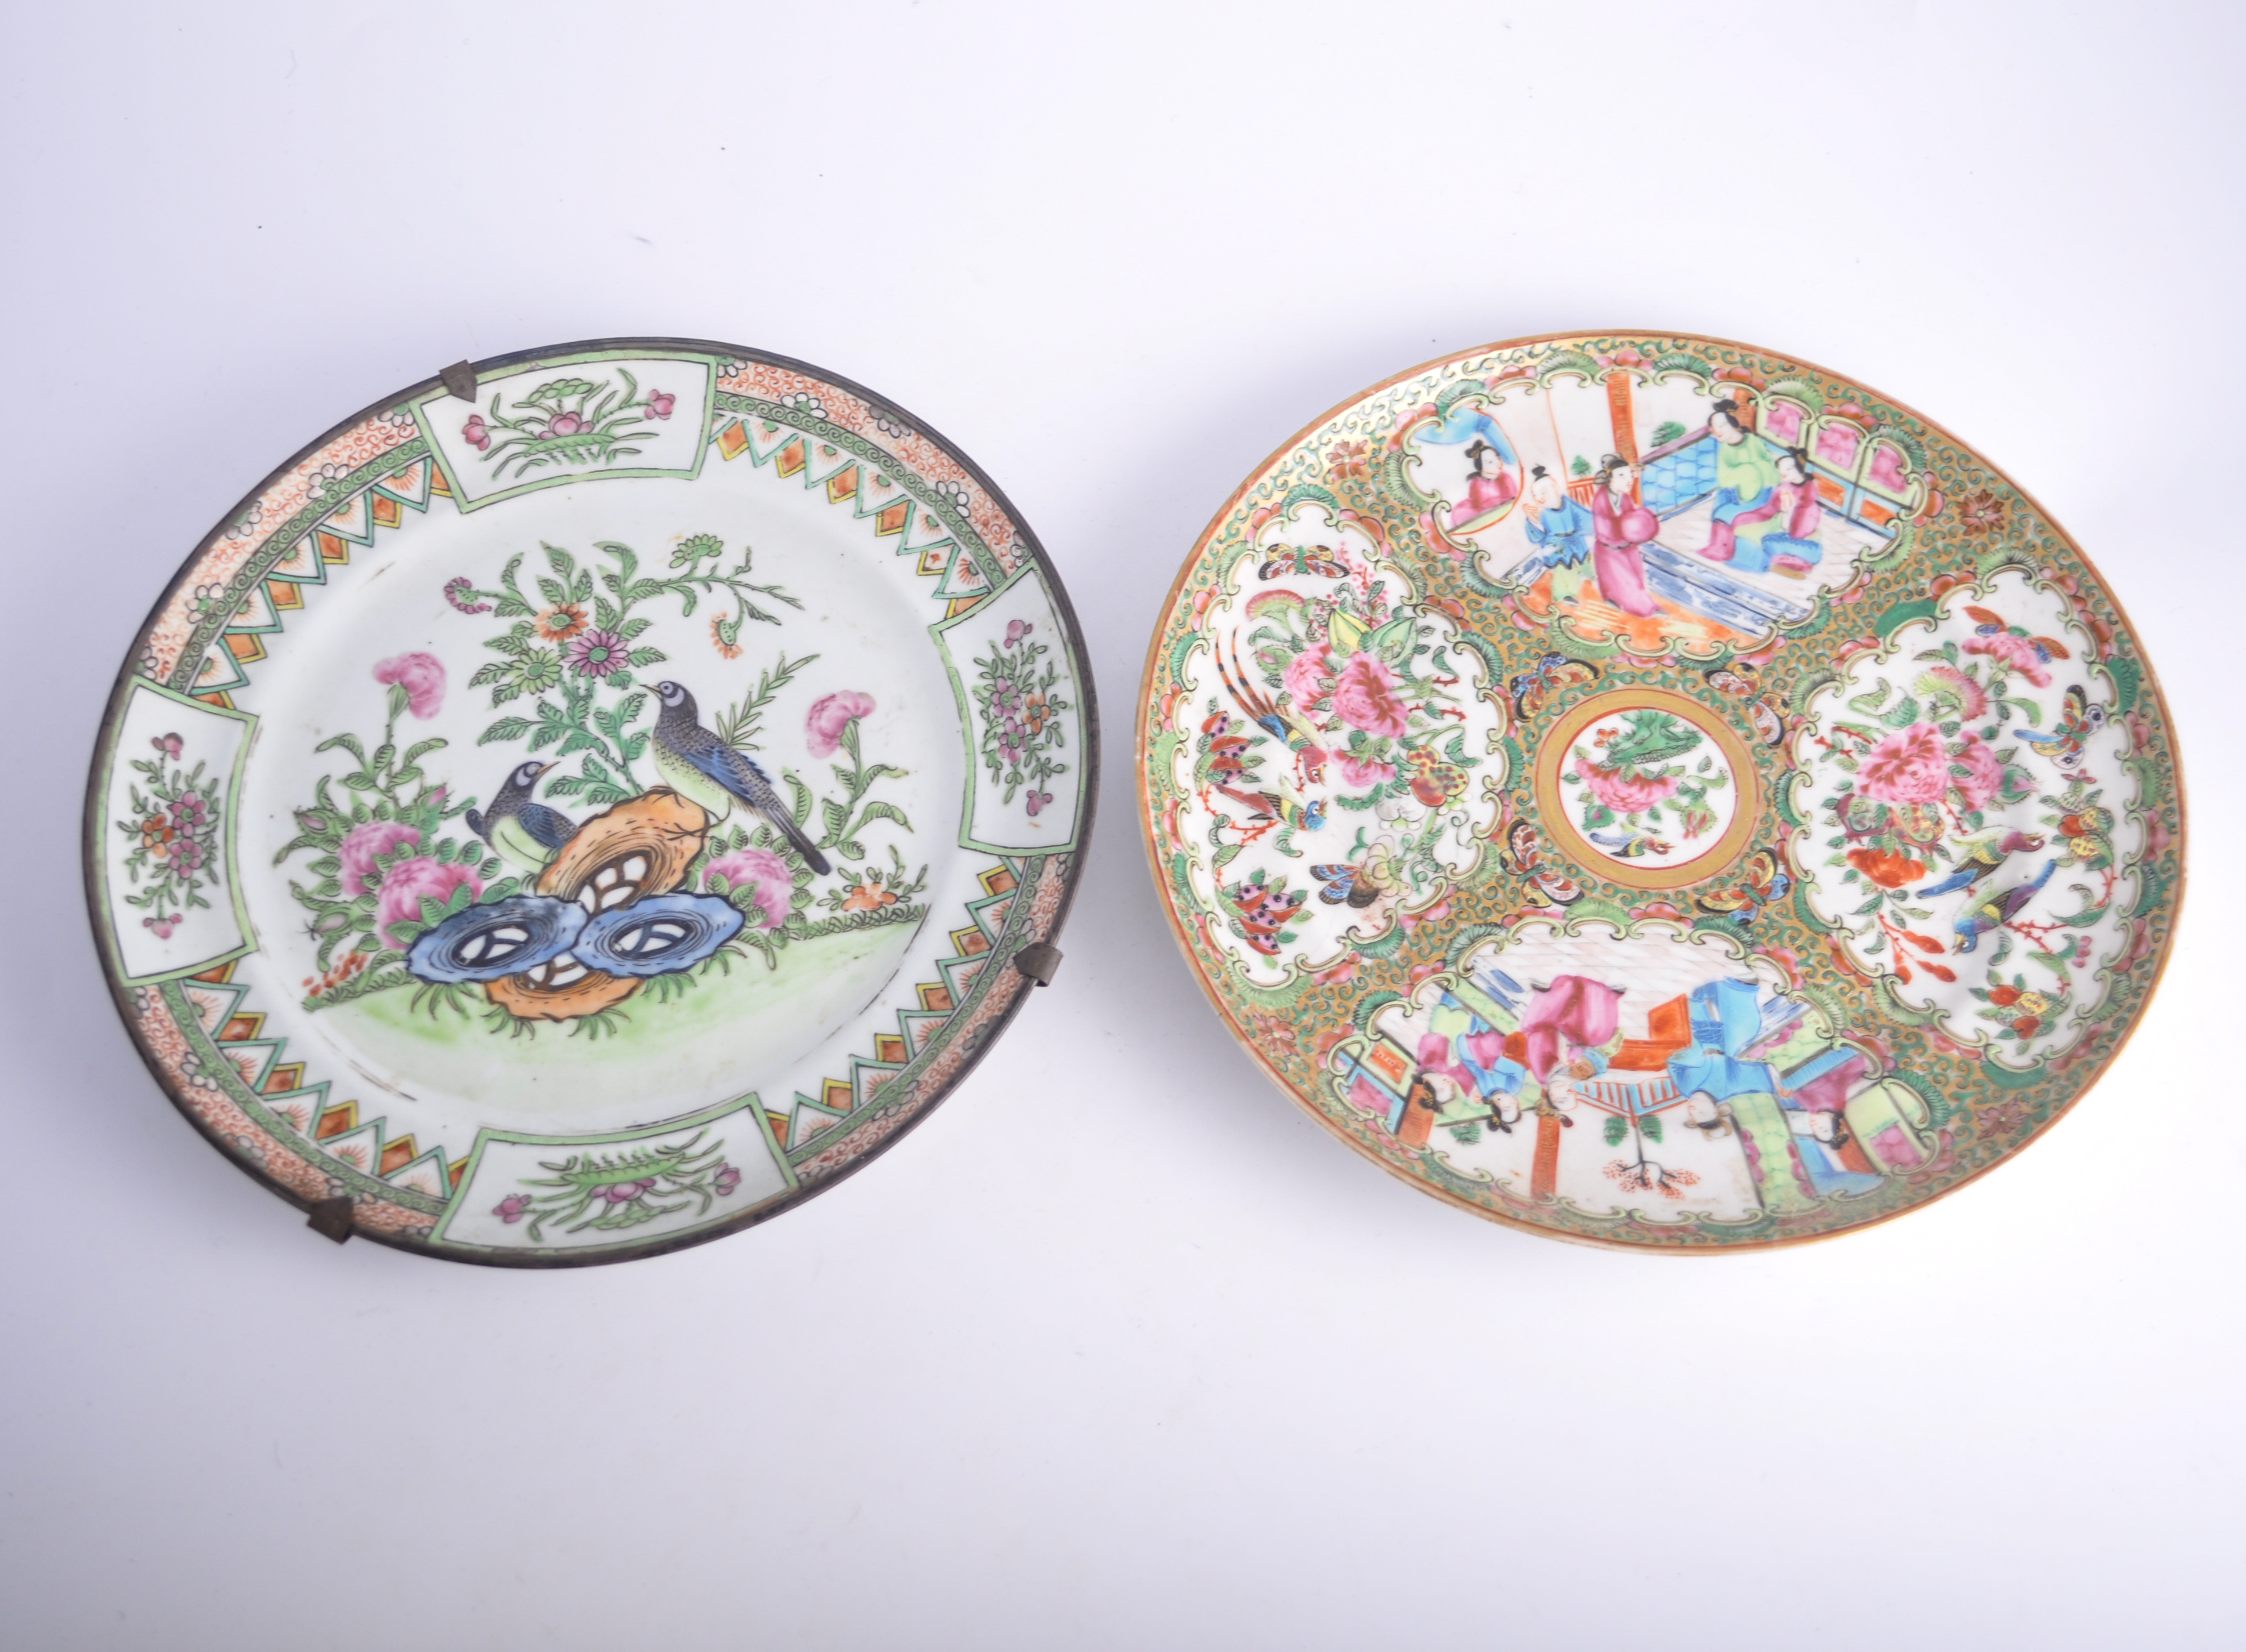 Canton plate, alternating reserves with figurative scenes, birds and flowers,